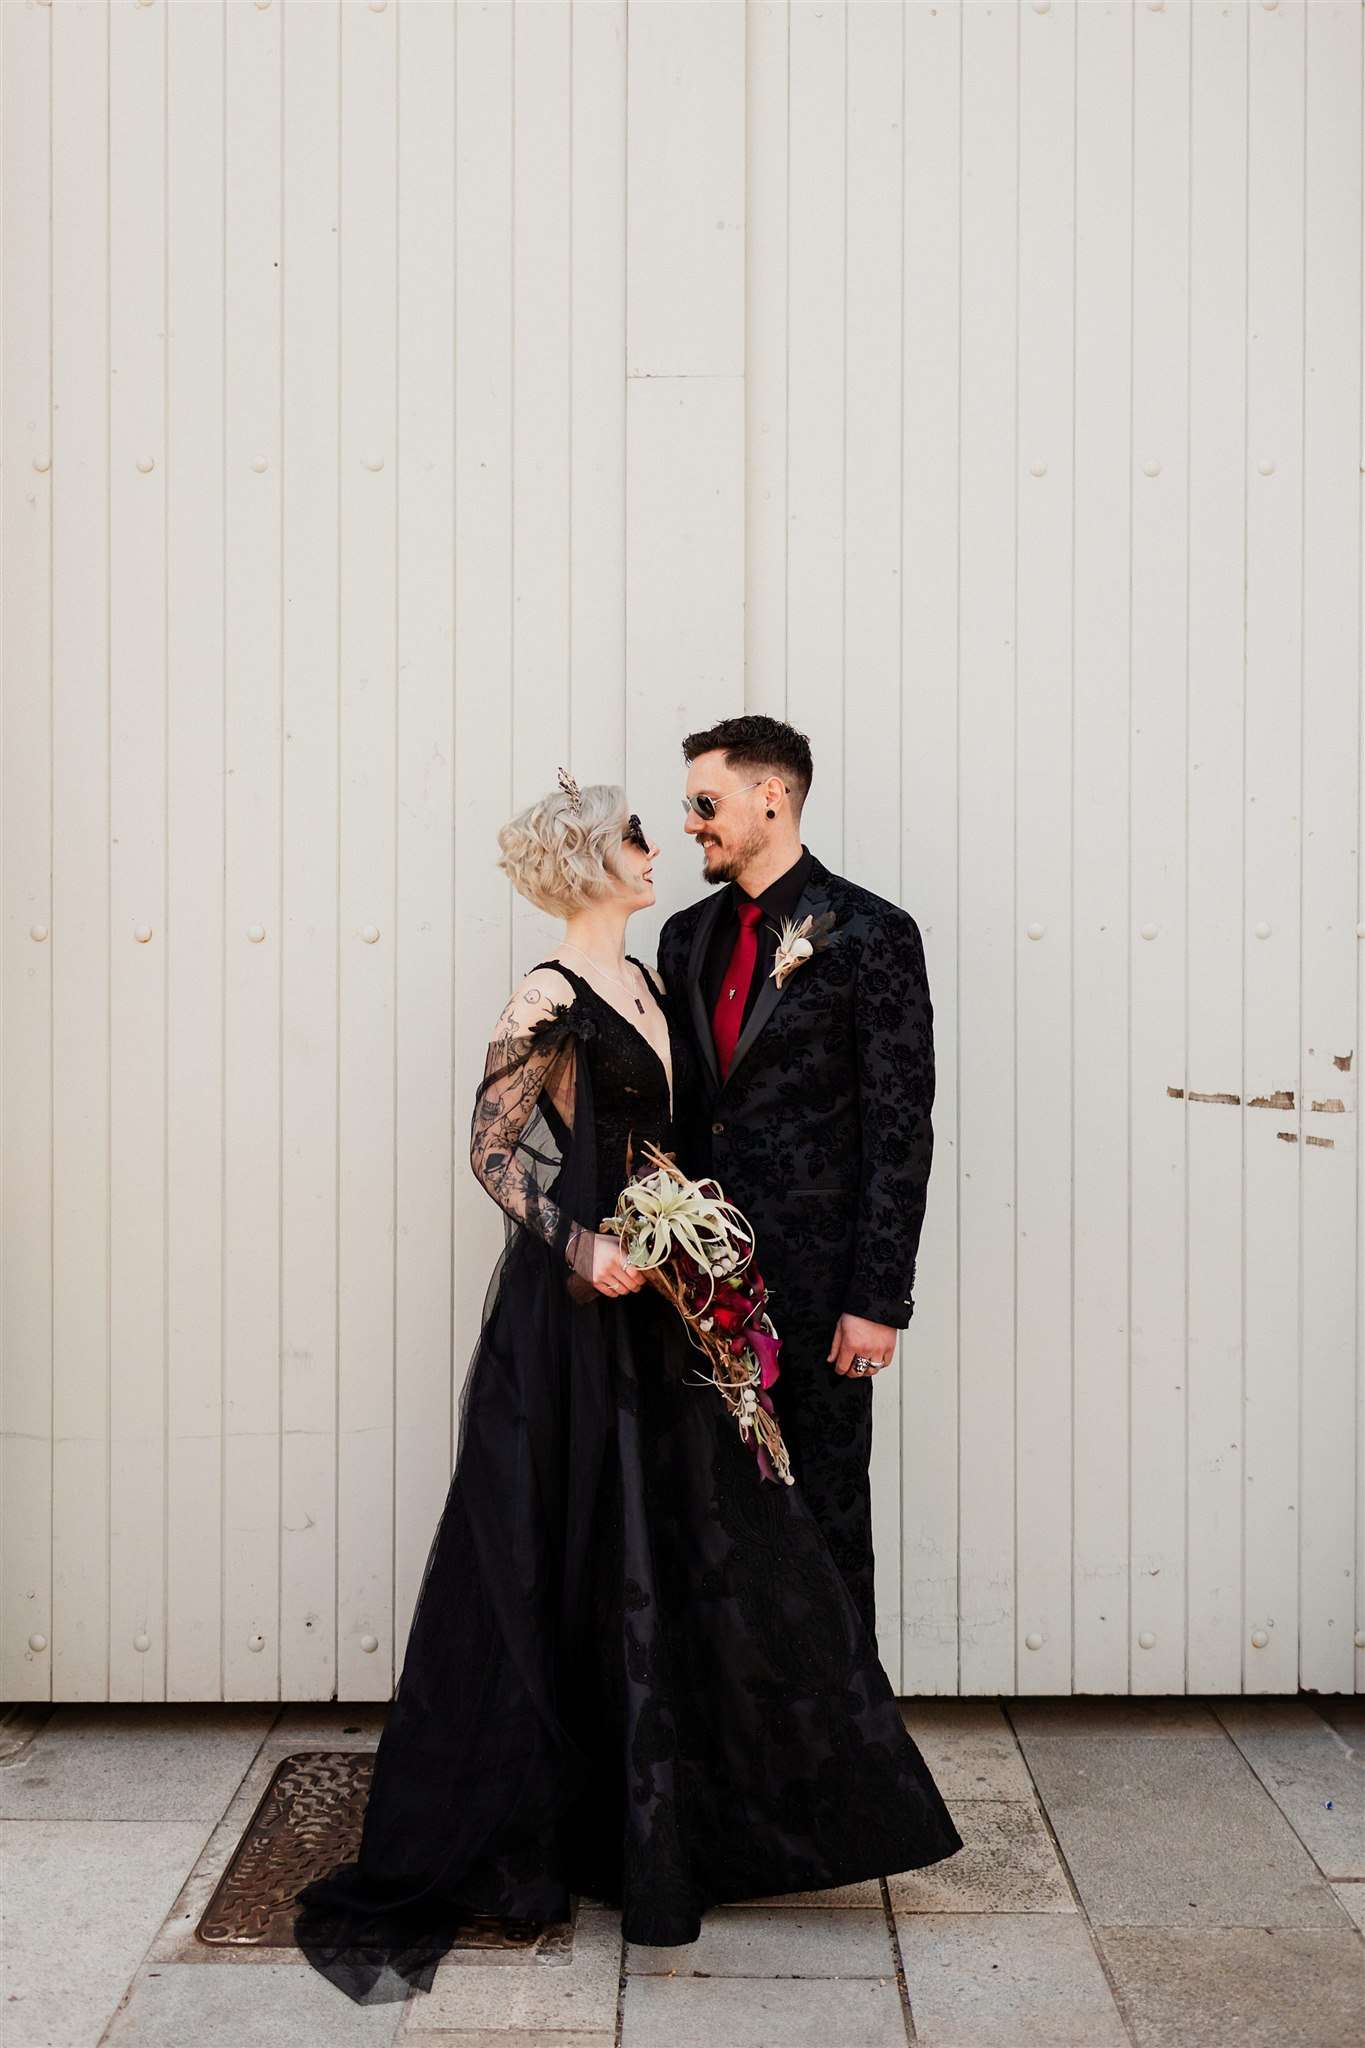 Heavy Metal Themed Wedding With The Bride In Black 48 